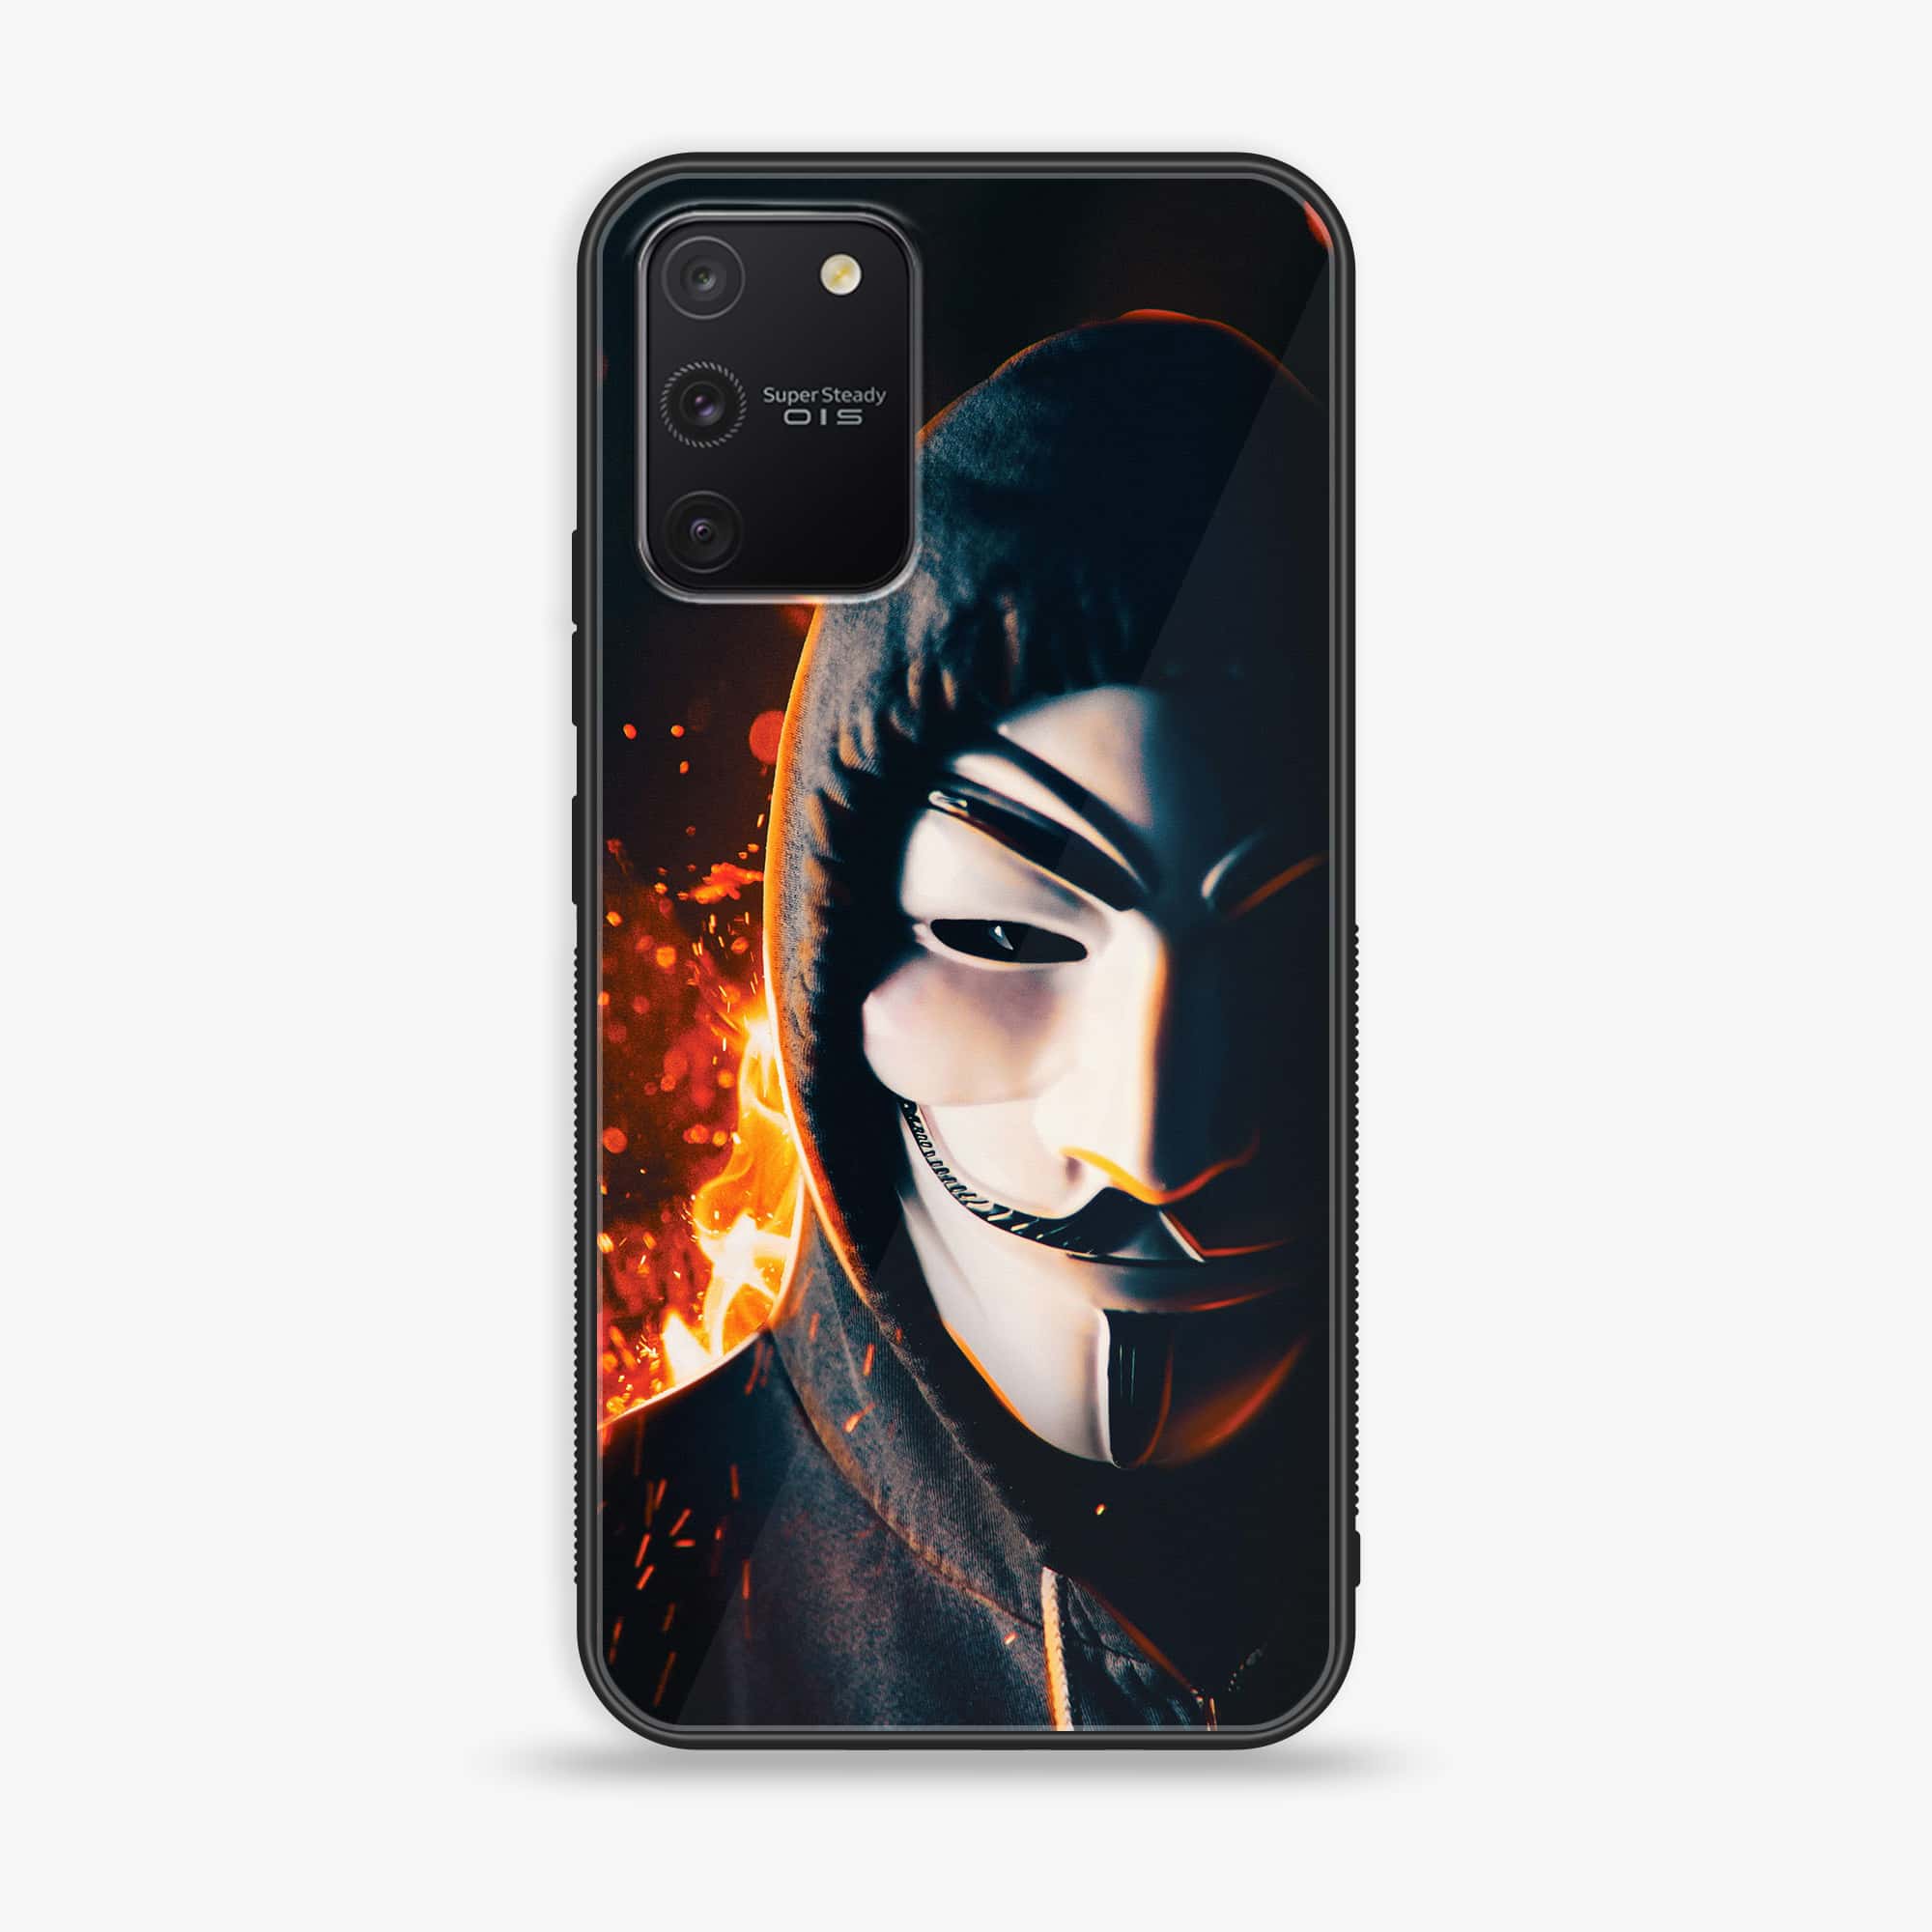 Galaxy S10 Lite - Anonymous 2.0 Series - Premium Printed Glass soft Bumper shock Proof Case